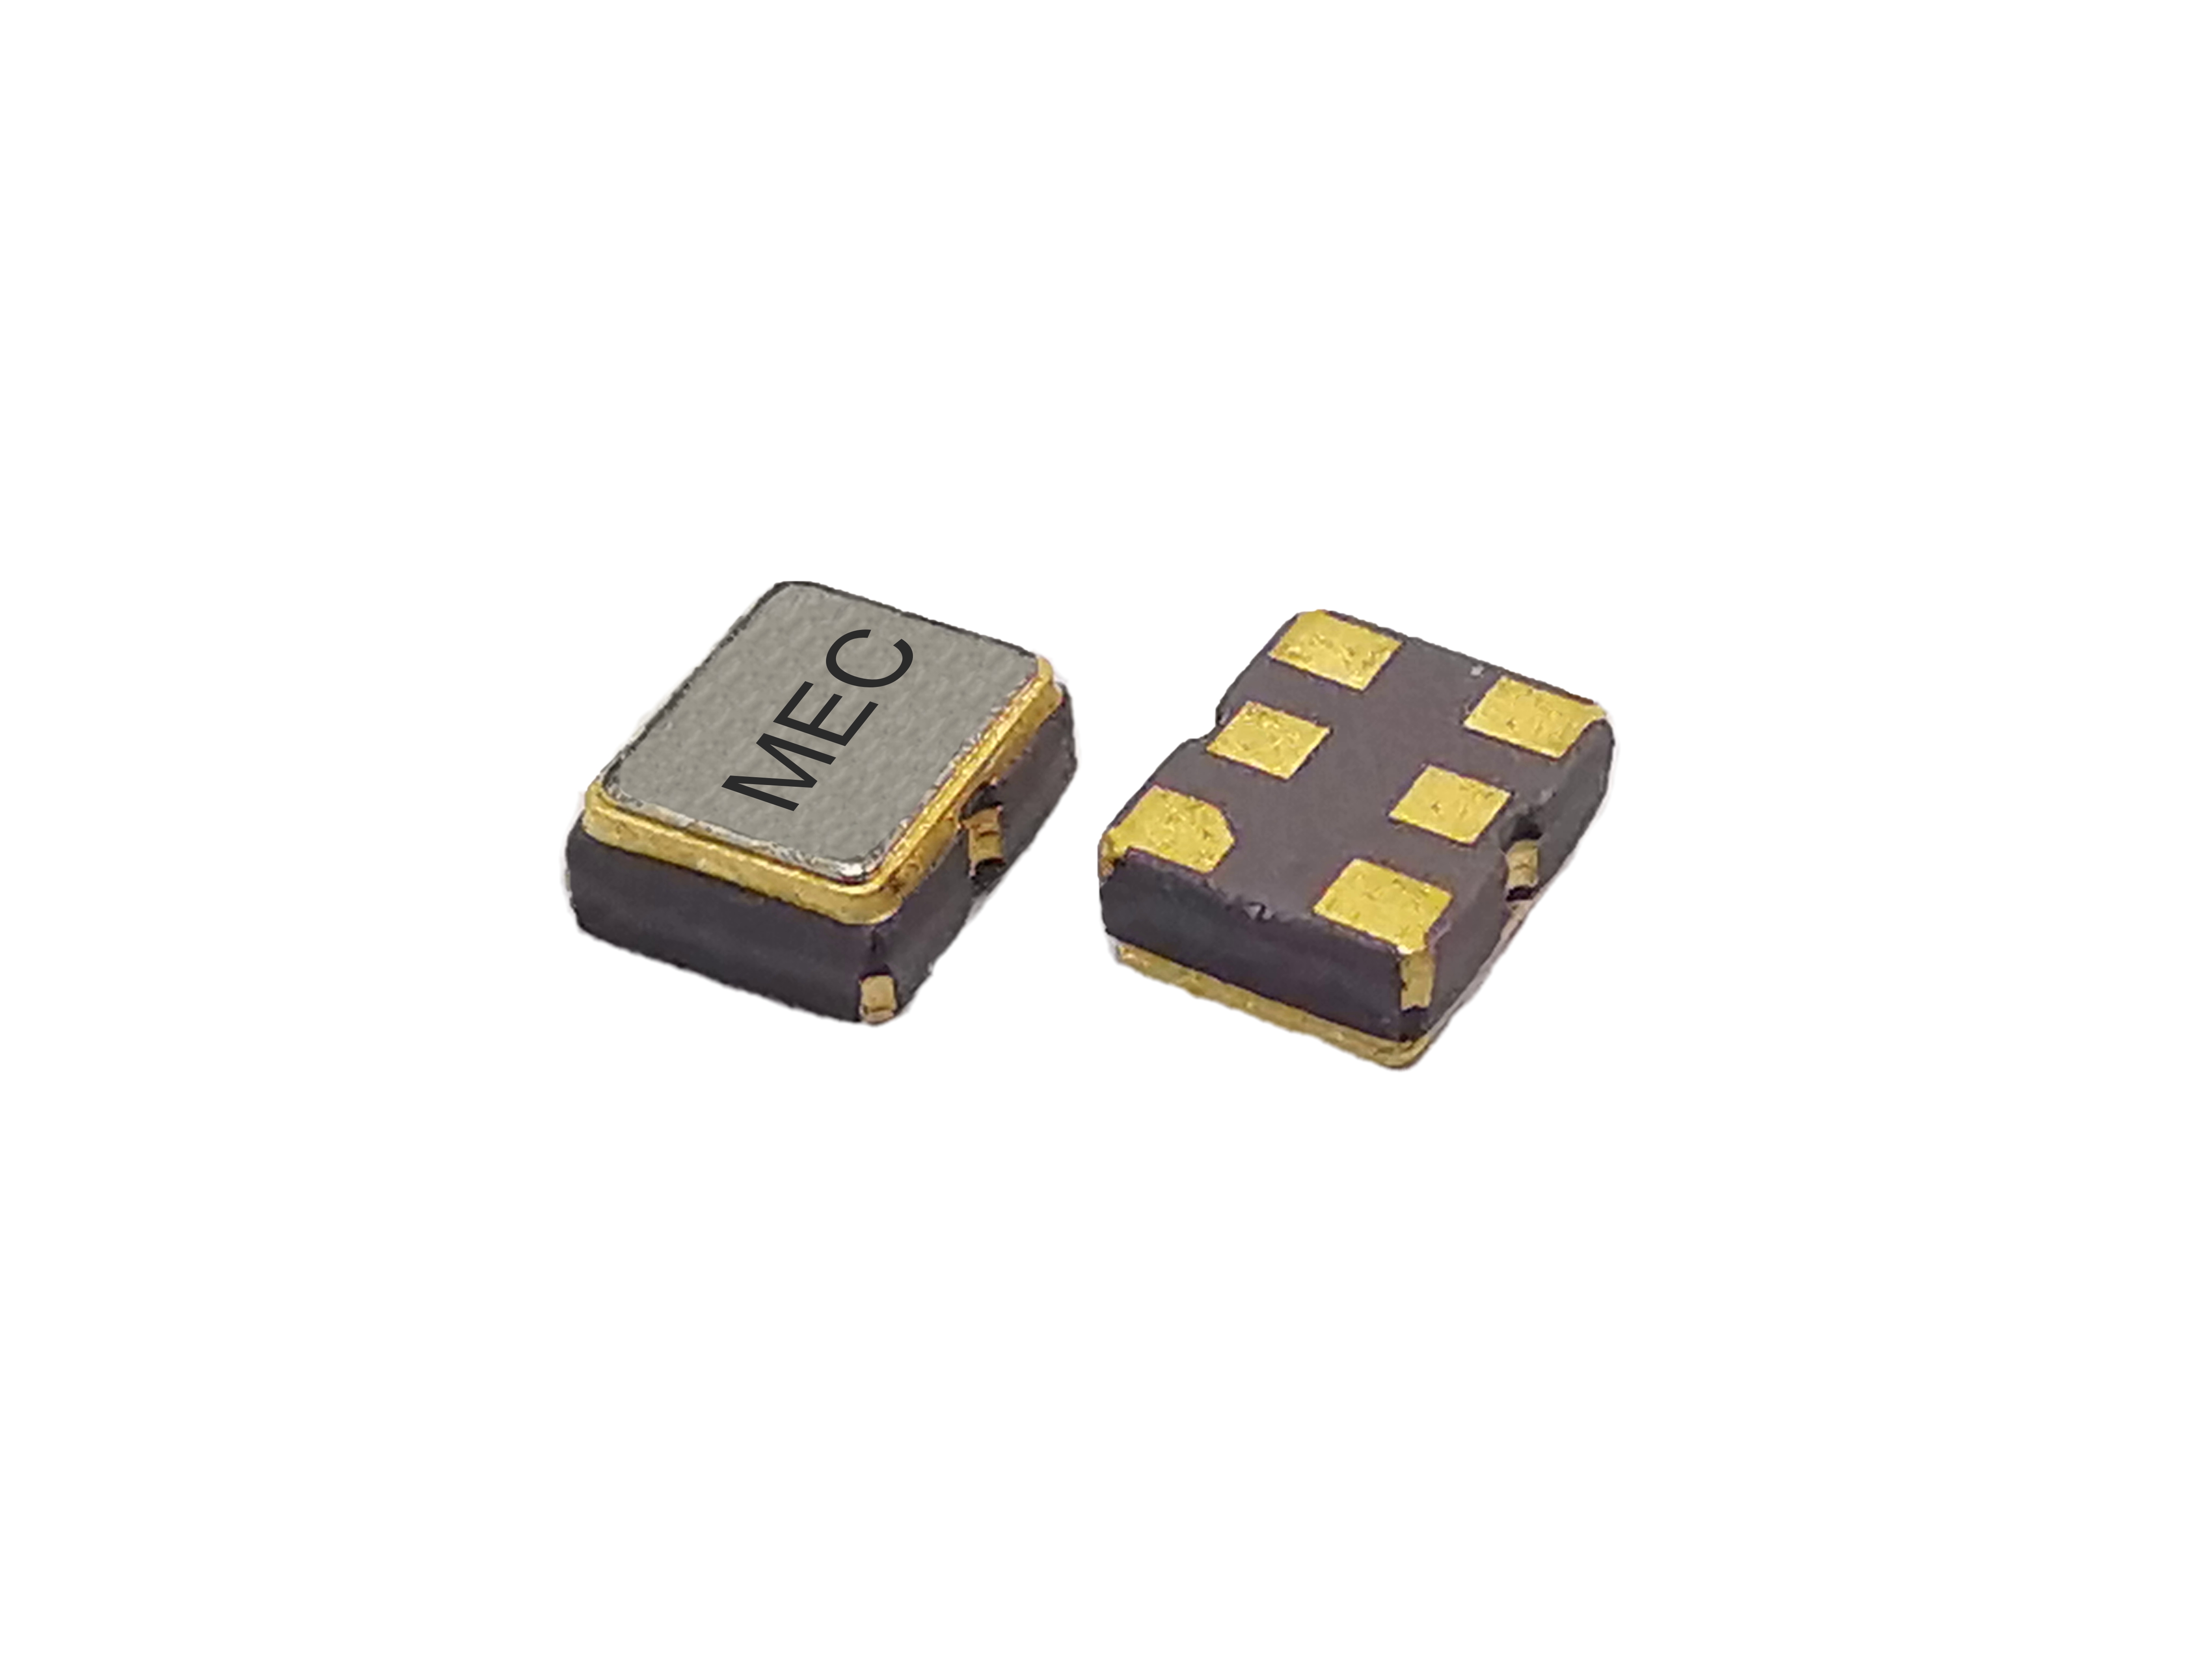 HCK226 2520 1.8V Differential With No PLL HCSL SMD Crystal Oscillator